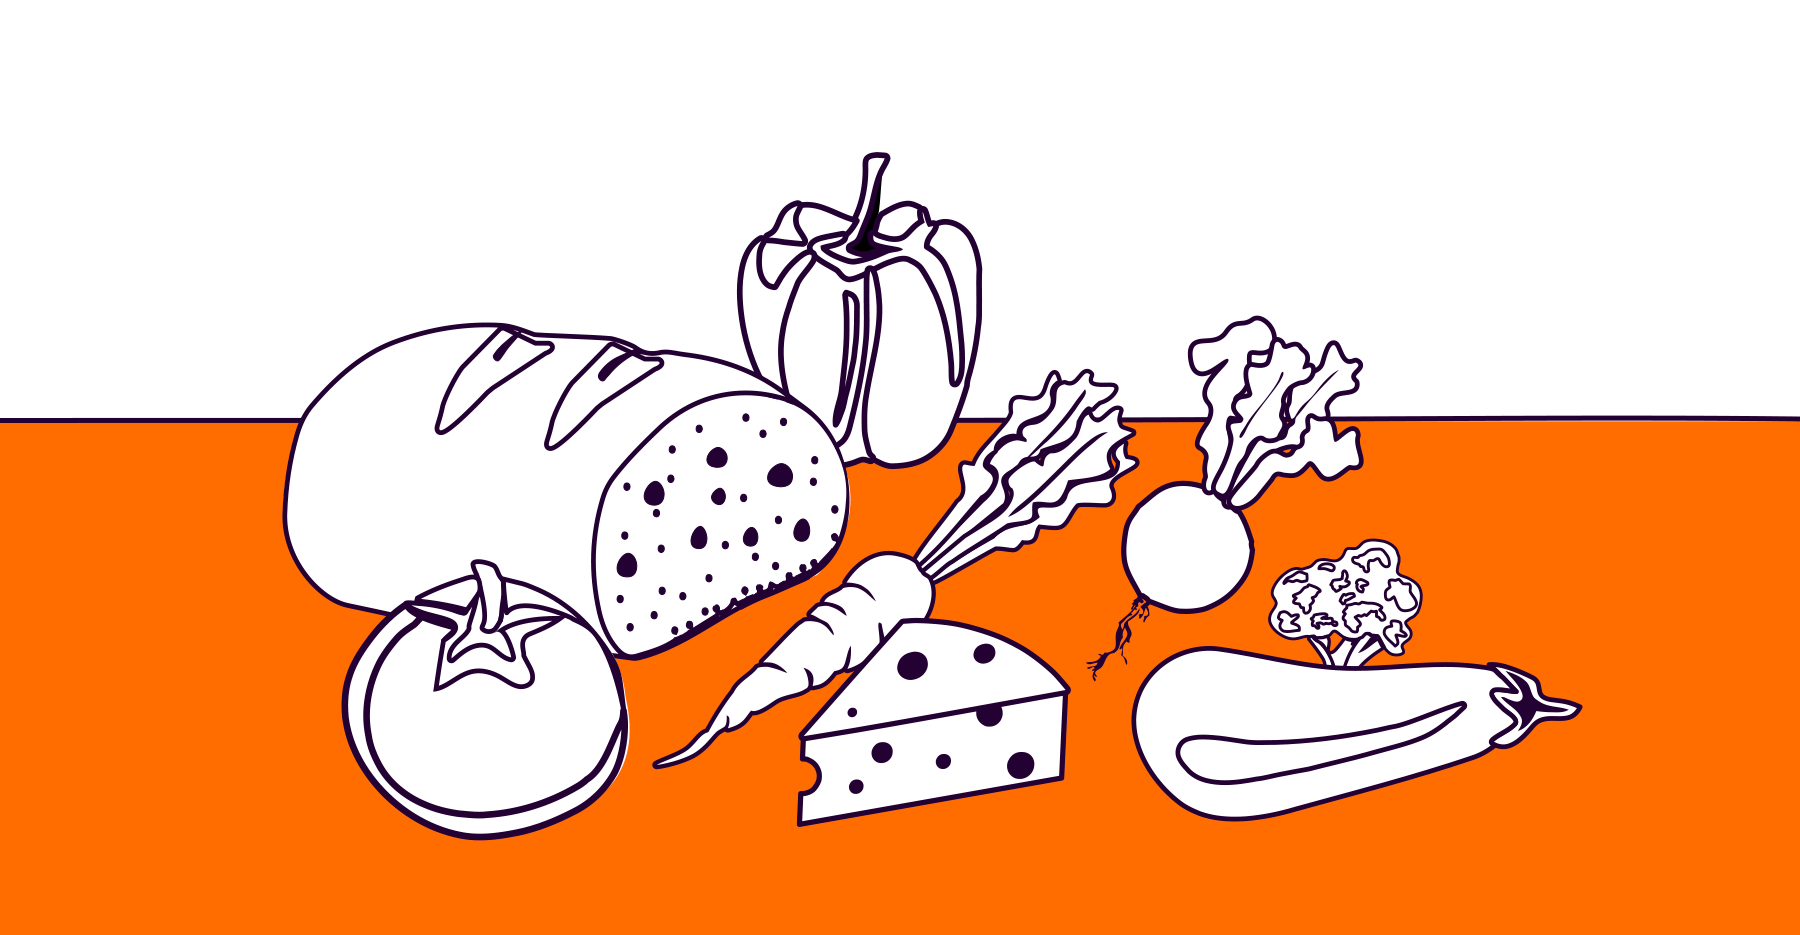 An illustration of breads, cheeses and vegetables over an orange background